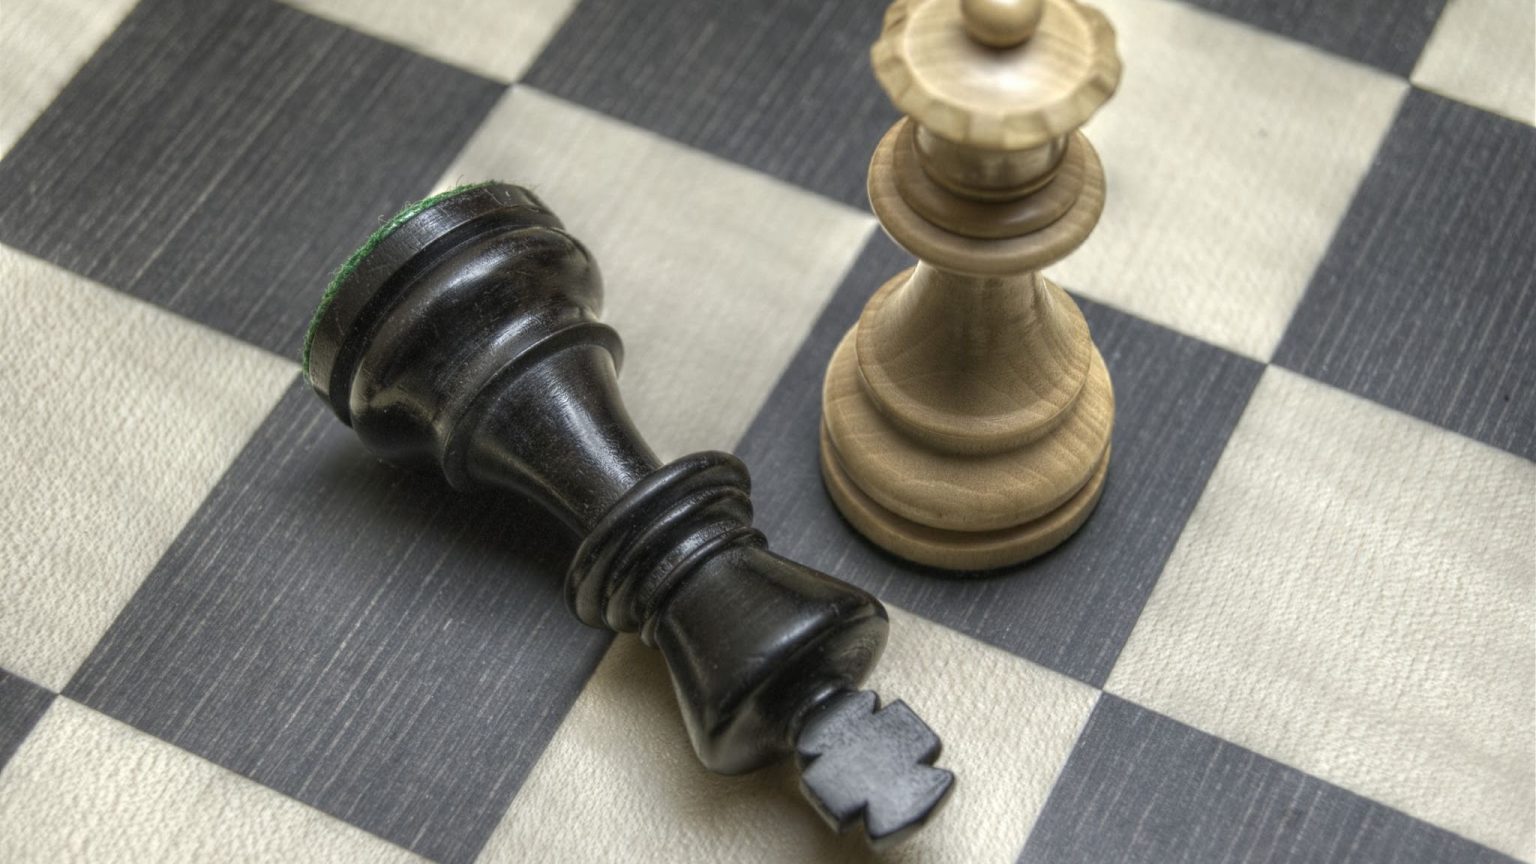 chess stalemate vs checkmate